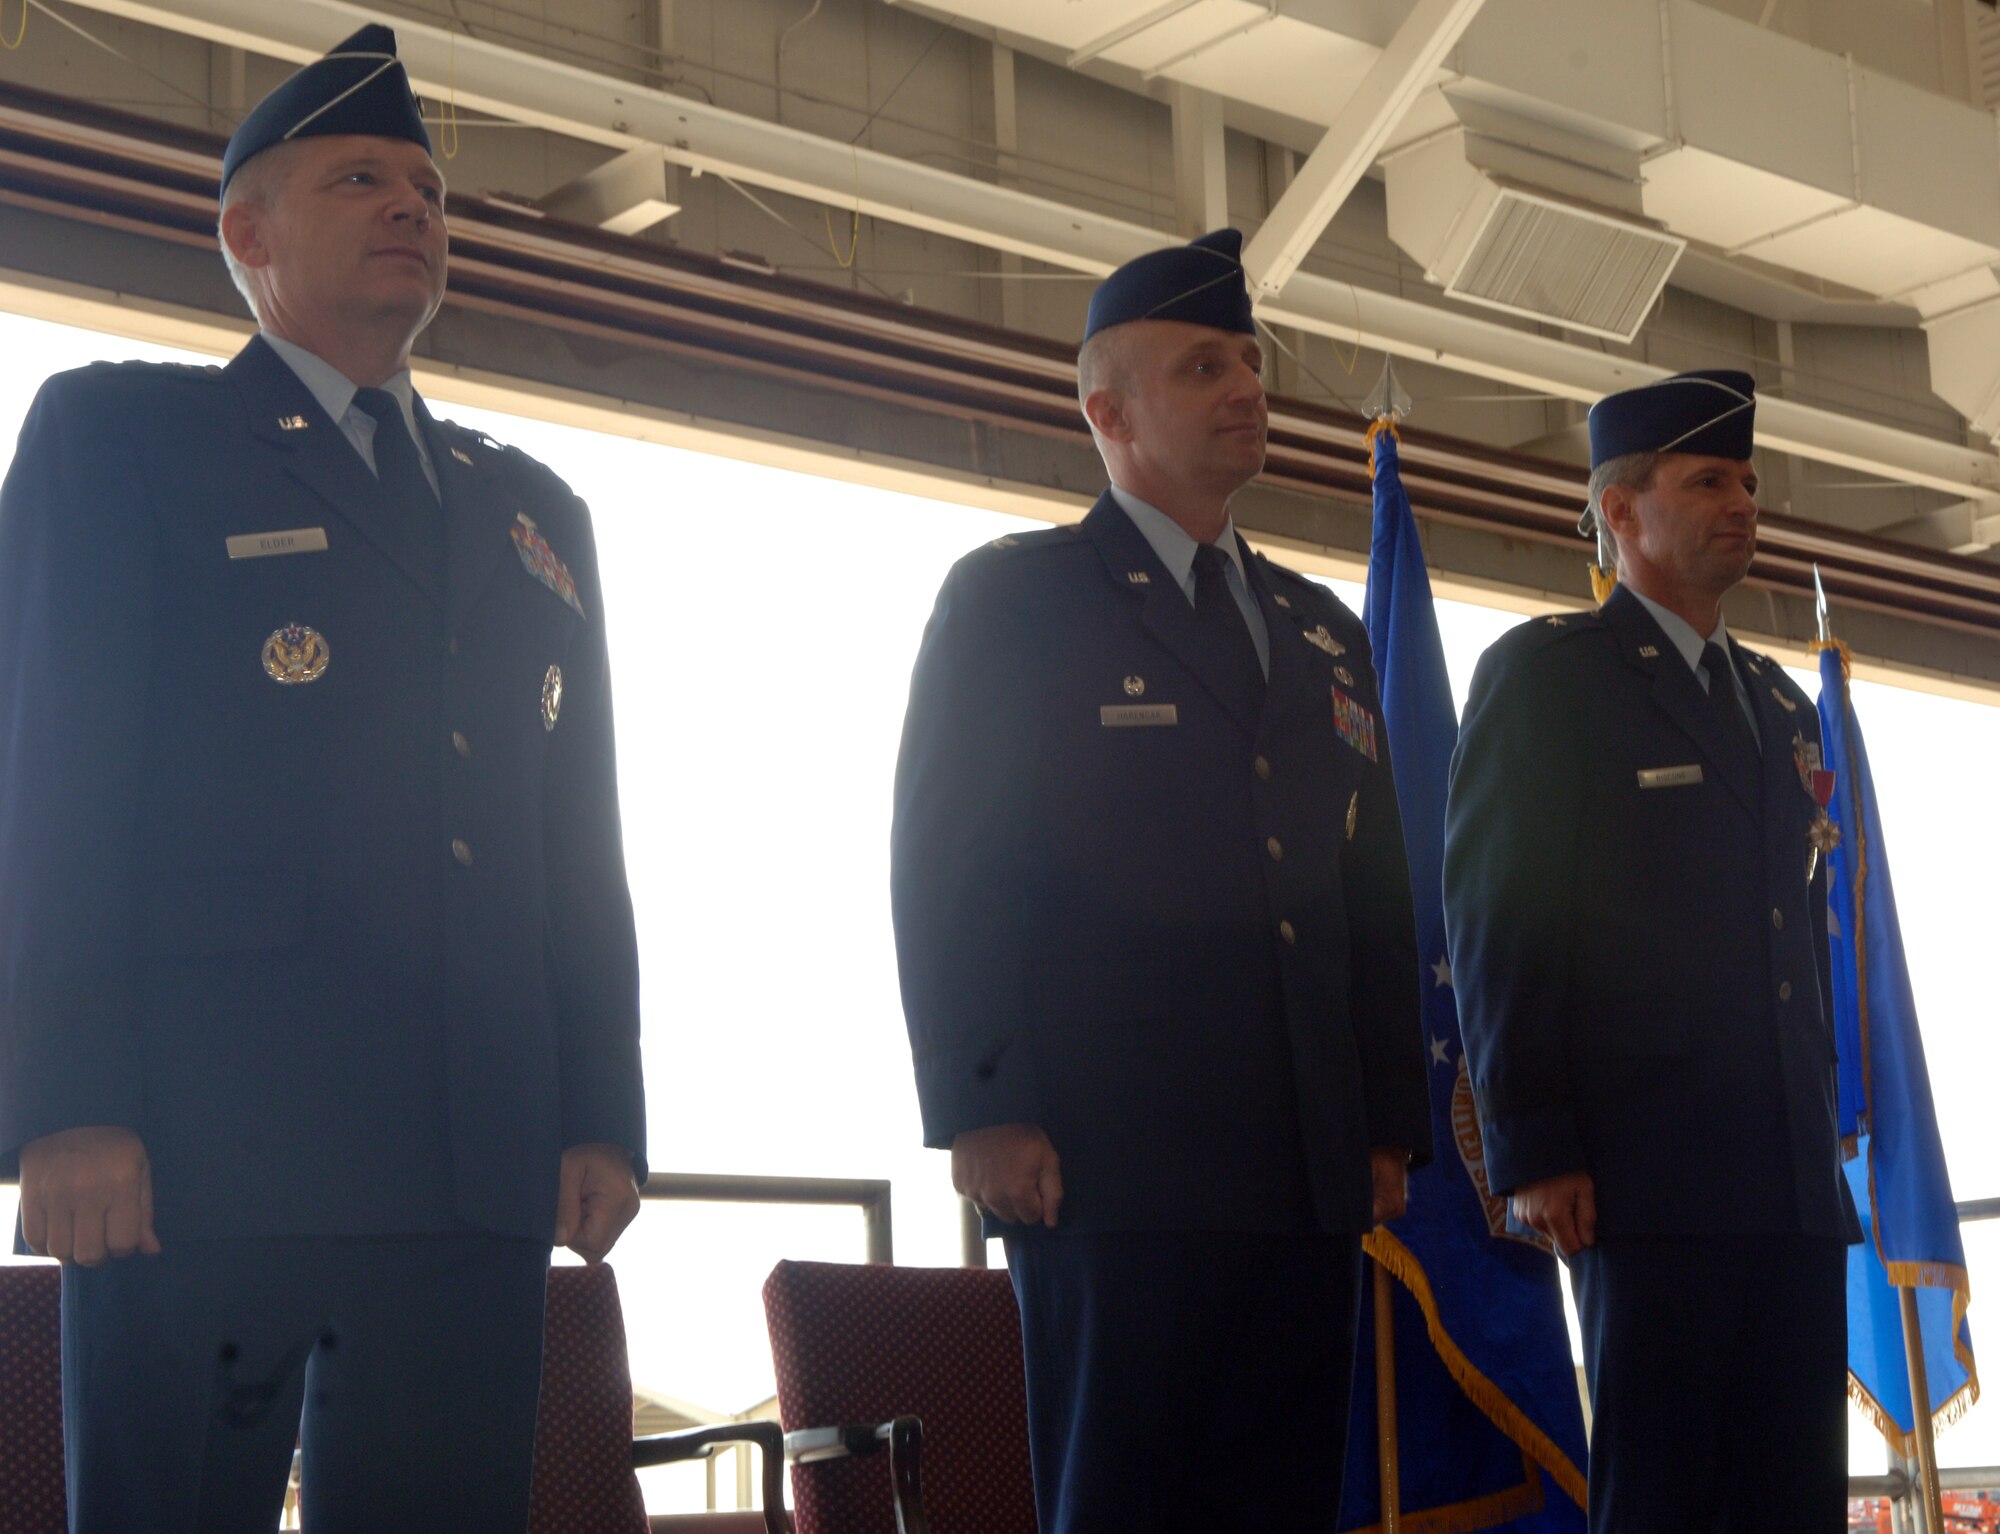 WHITEMAN AIR FORCE BASE, Mo. -- (Left to right) Lt. Gen. Robert Elder Jr., 8th Air Force commander, Col. Garrett Harencak and Brig. Gen. Greg Biscone, stand at attention while the men and women of the 509th Bomb Wing sing the Air Force Song during the 509th Bomb Wing change-of-command ceremony Sept. 14. Colonel Harencak took command of the 509th BW from General Biscone during the ceremony. General Biscone travels to MacDill Air Force Base, Fla., to become the deputy commander of Operations at U.S. Central Command. (U.S. Air Force photo/Staff Sgt. Felicia Haecker)

